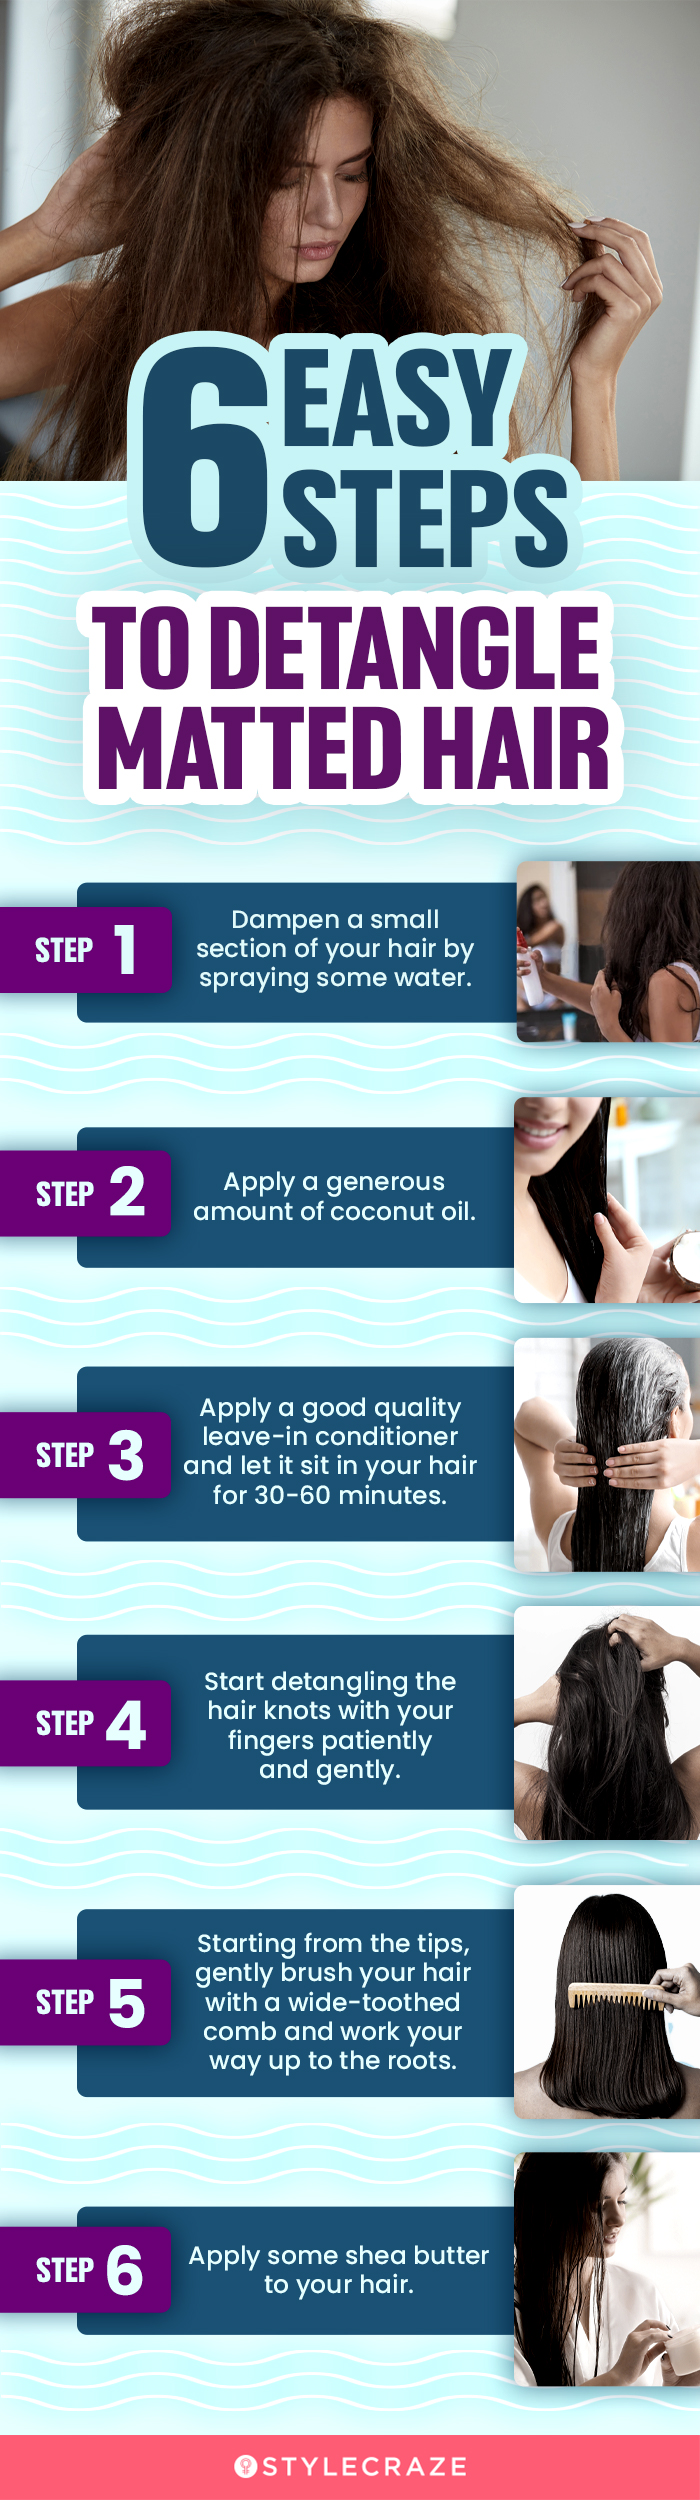 How to Detangle Matted Hair, and Stop It from Happening Again |  NaturallyCurly.com